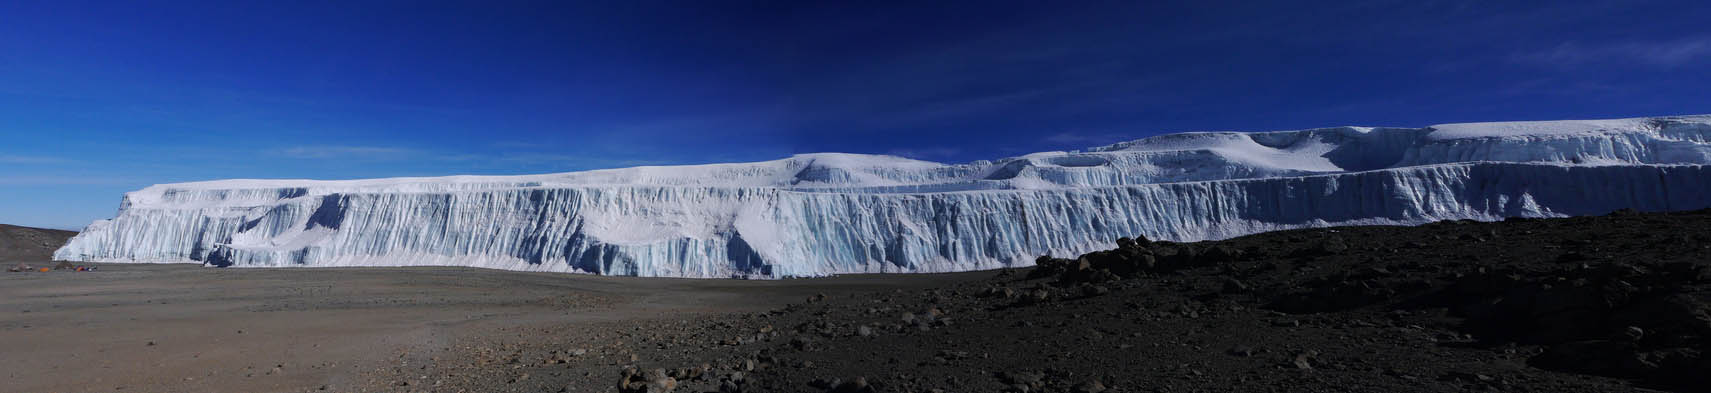 Kilimanjaro’s Shrinking Ice Fields  - related image preview